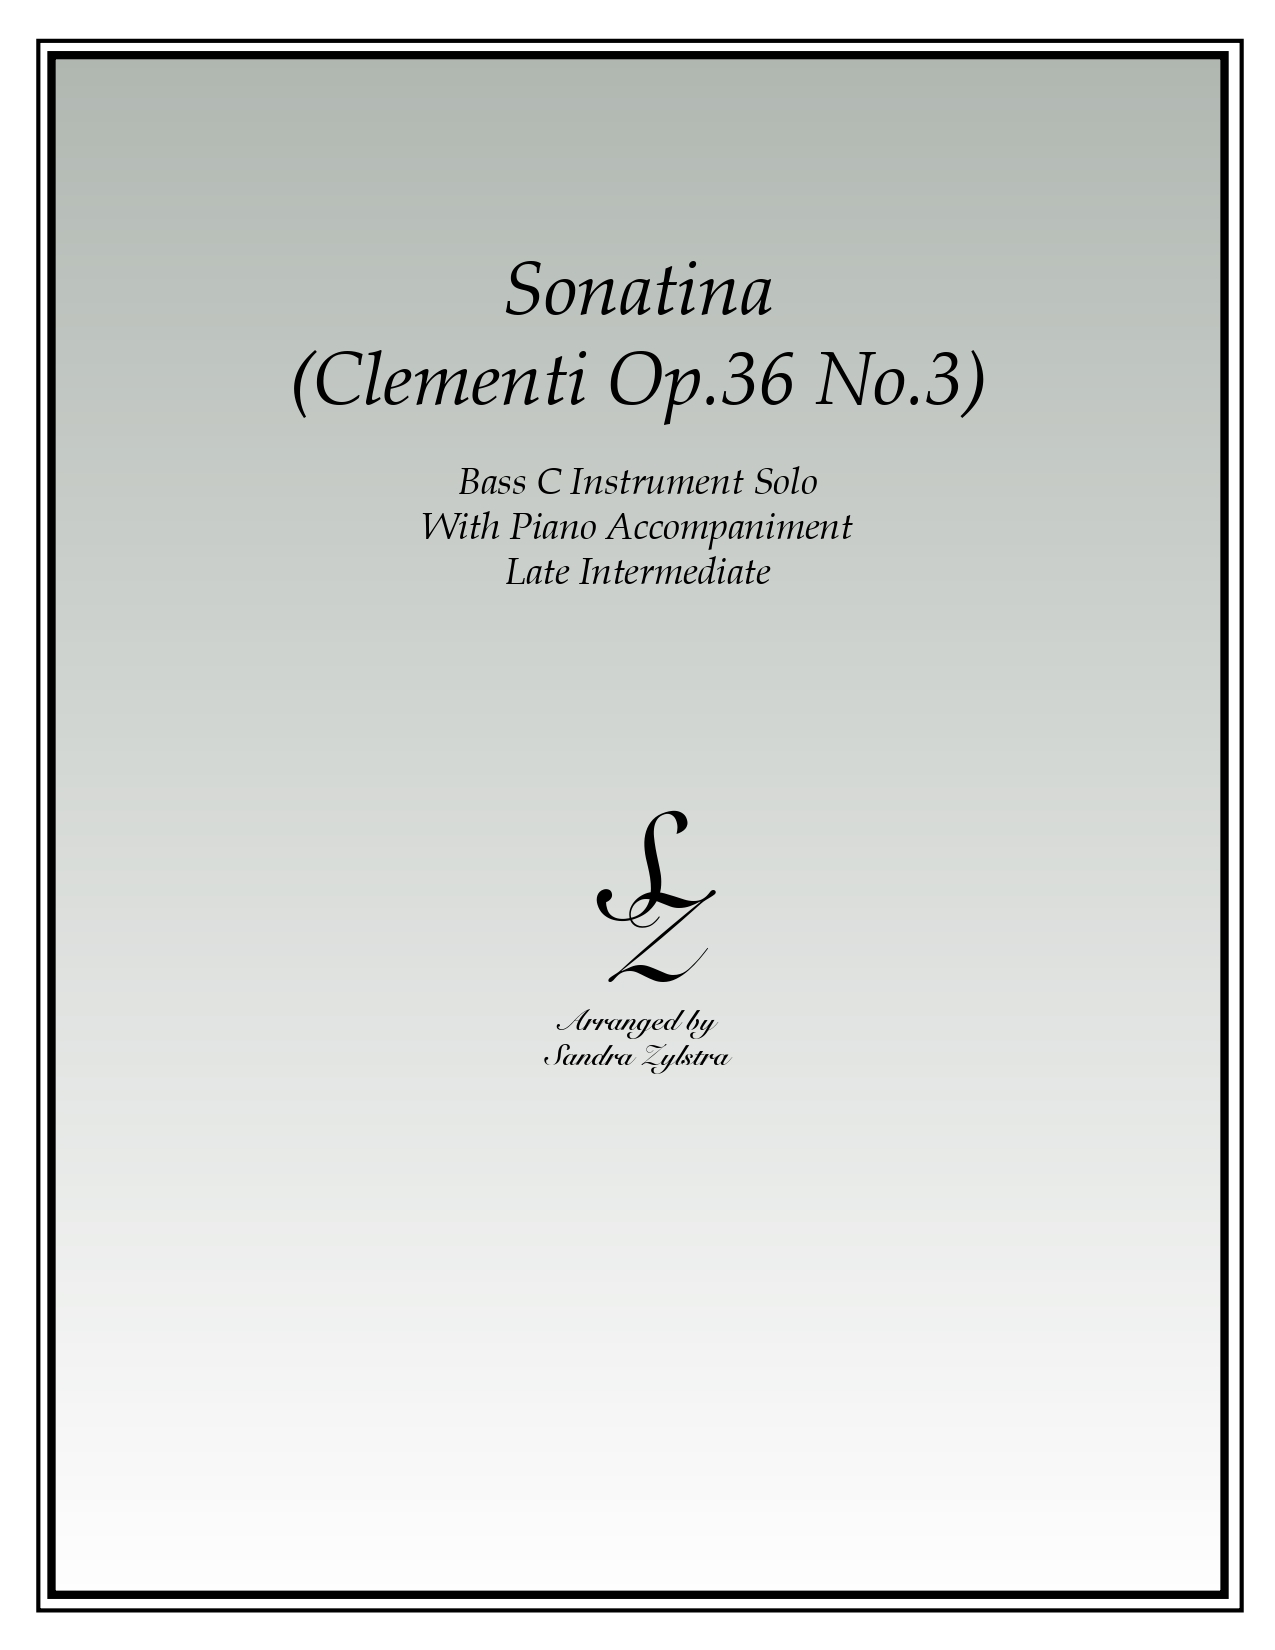 Sonatina Op. 36. No. 3 Clementi bass C instrument solo part cover page 00011